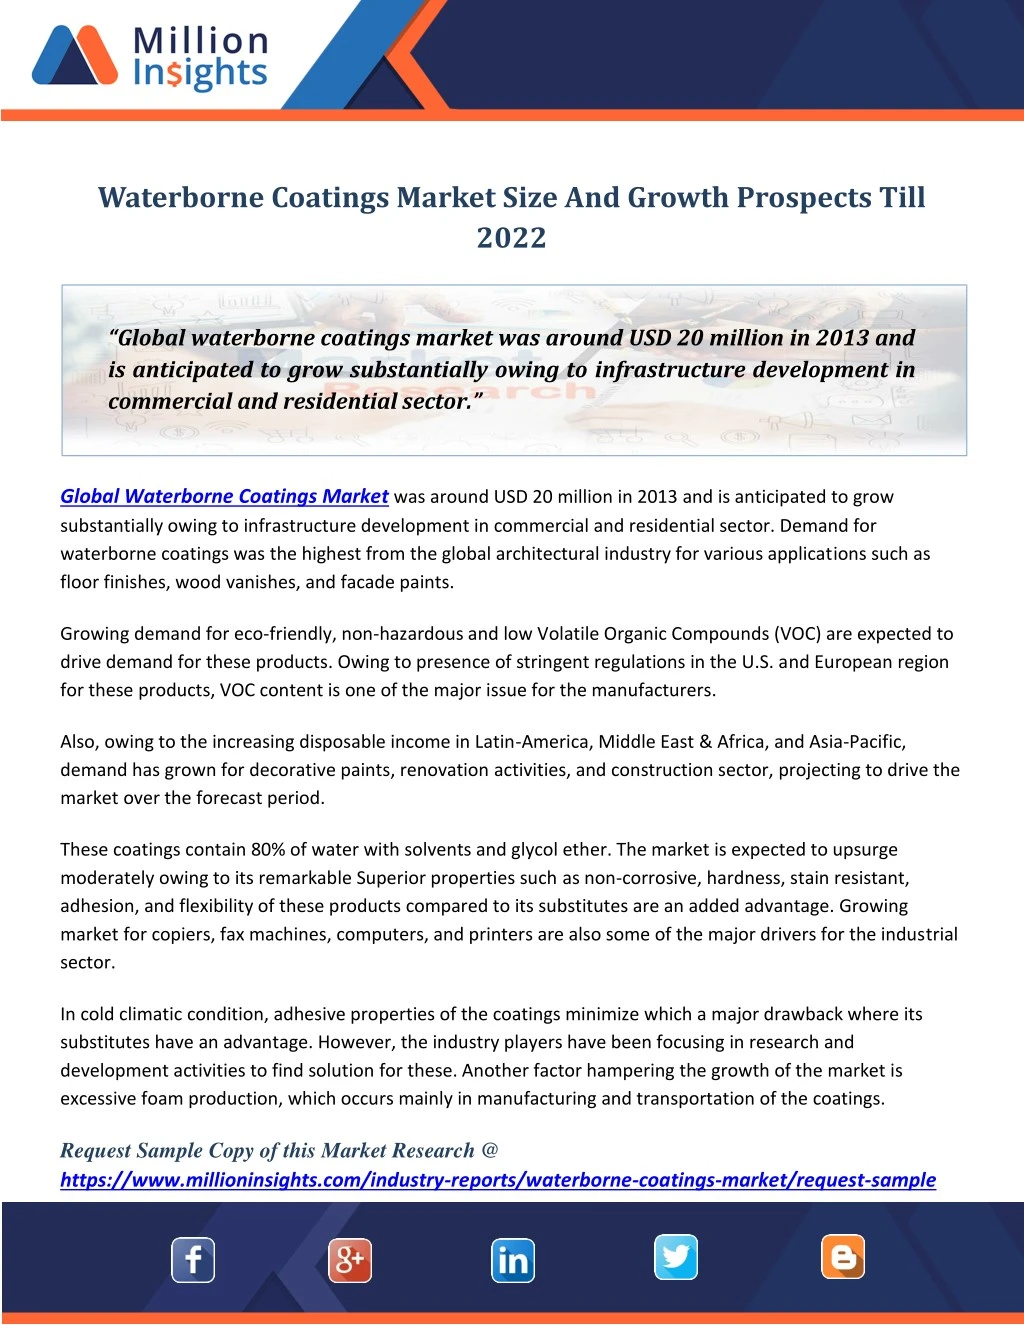 waterborne coatings market size and growth